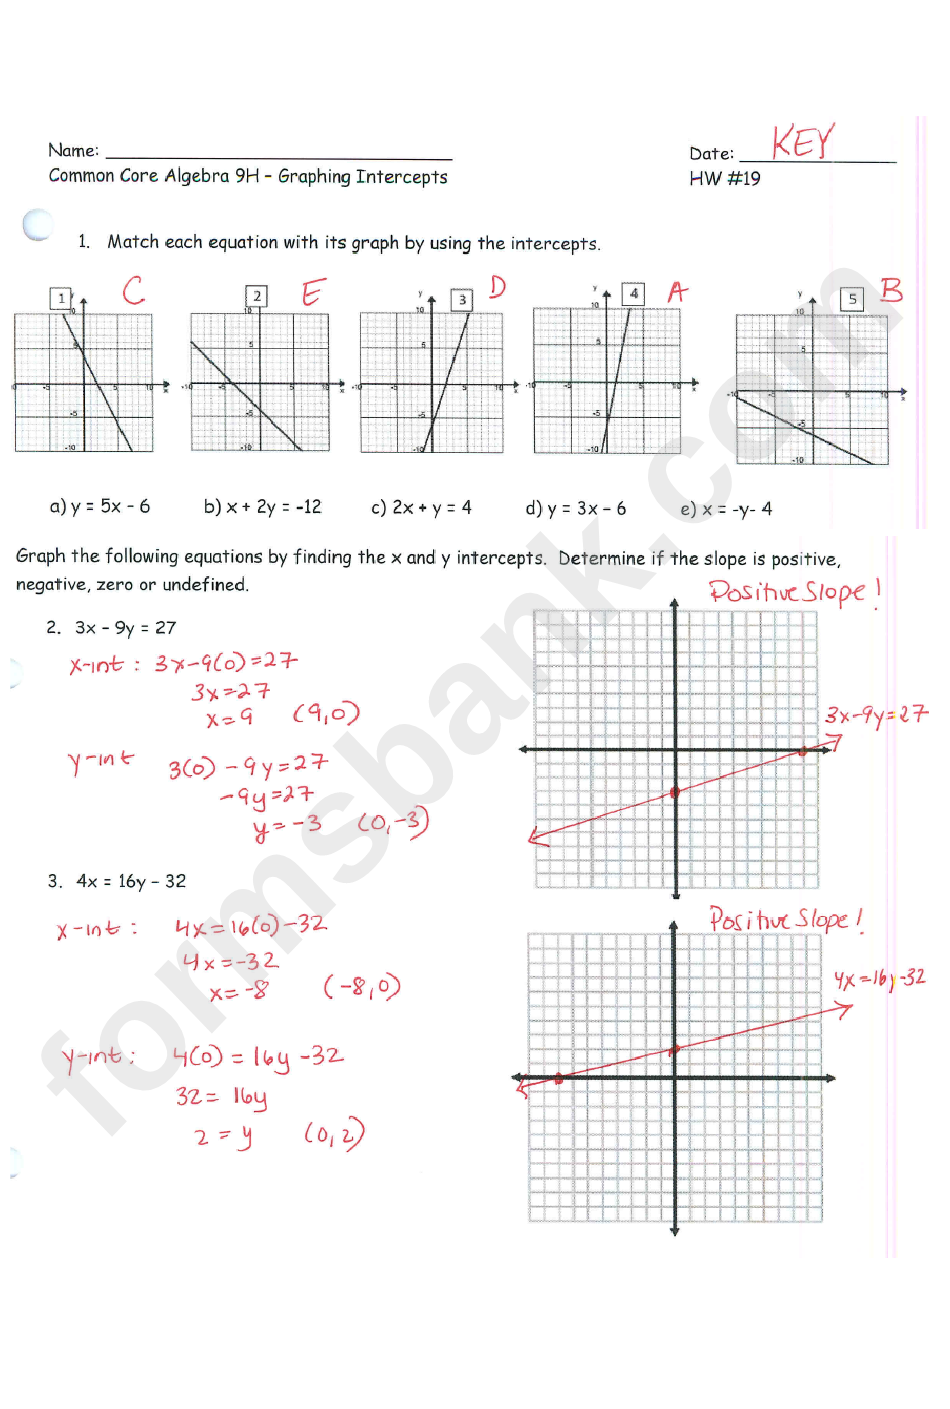 Graphing Intercepts Workhseet With Answers - Common Core Algebra 9h